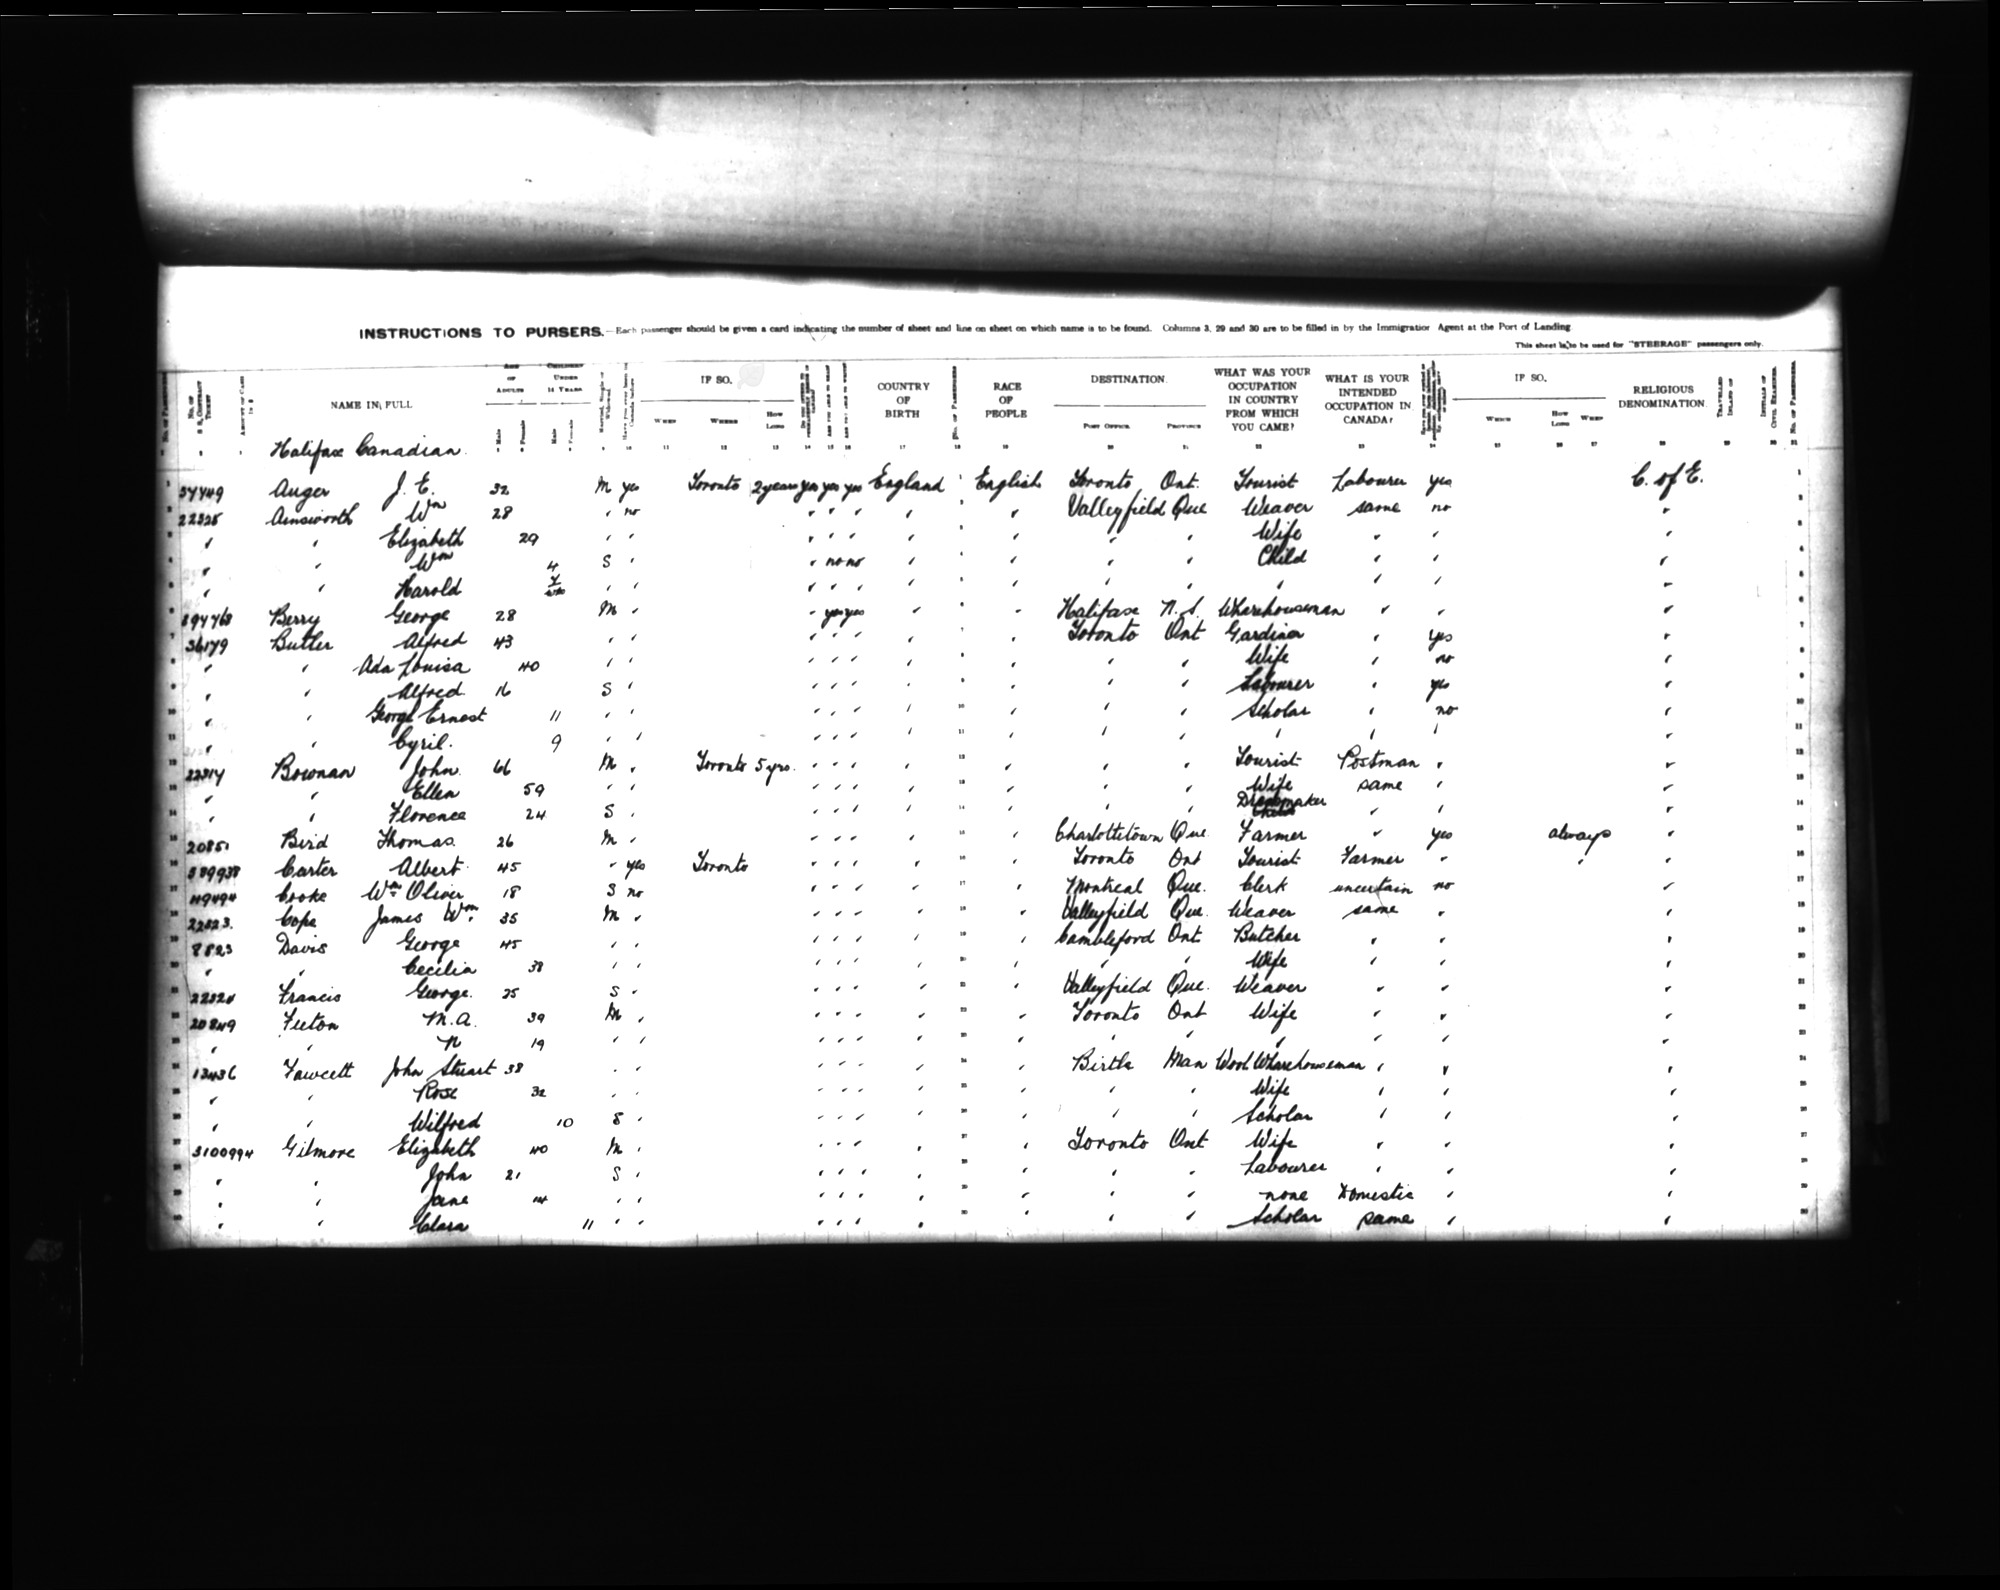 Digitized page of Passenger Lists for Image No.: CANIMM1913PLIST_0000406960-00585